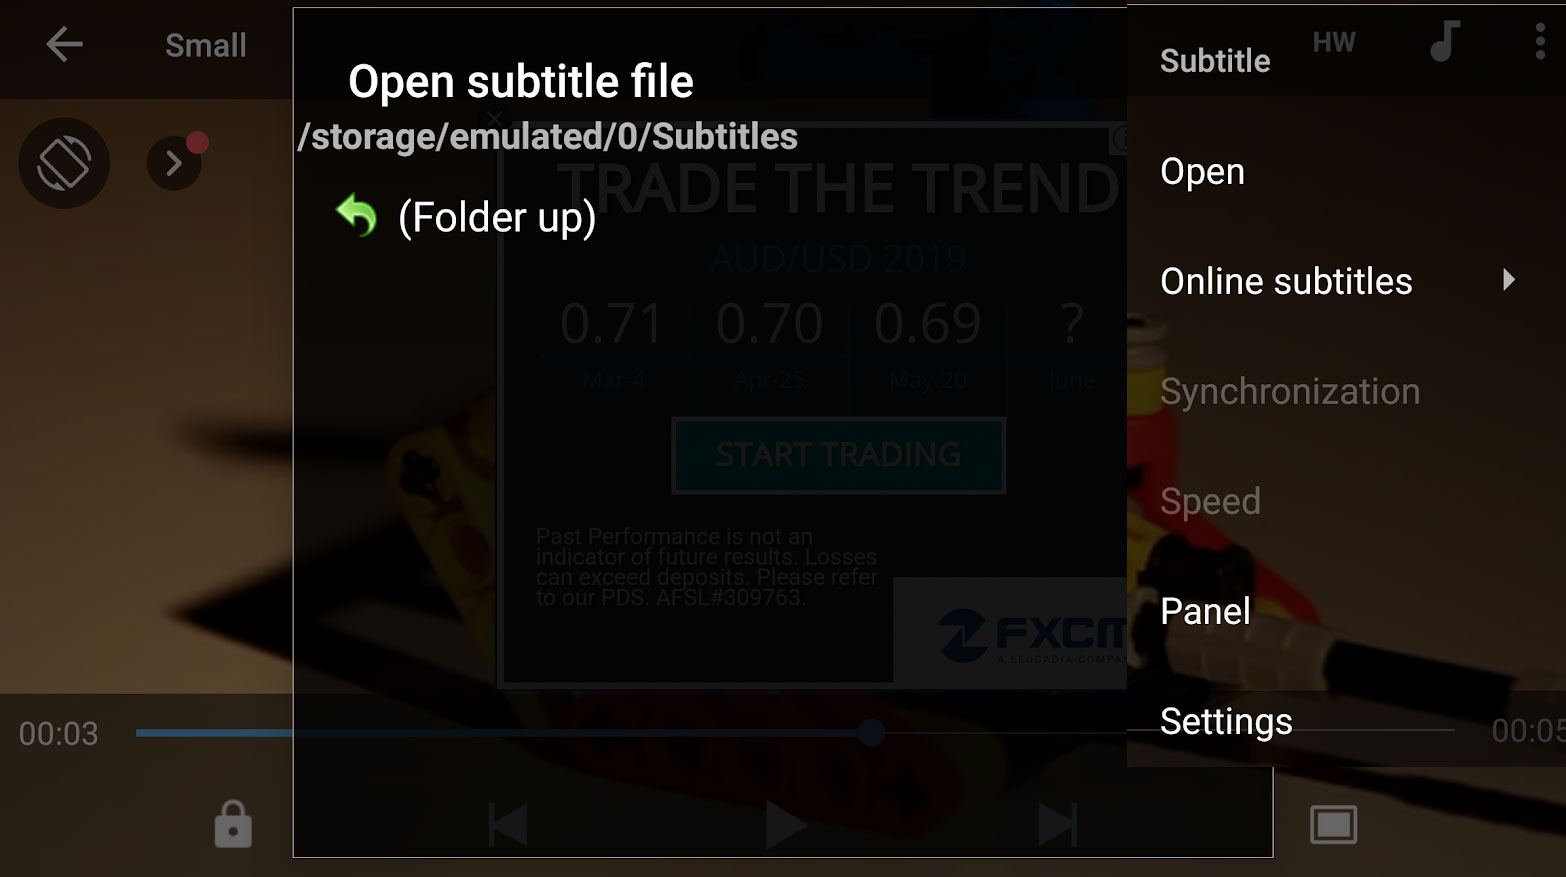 MX Player – How to Open Local Subtitles for Movies and Videos